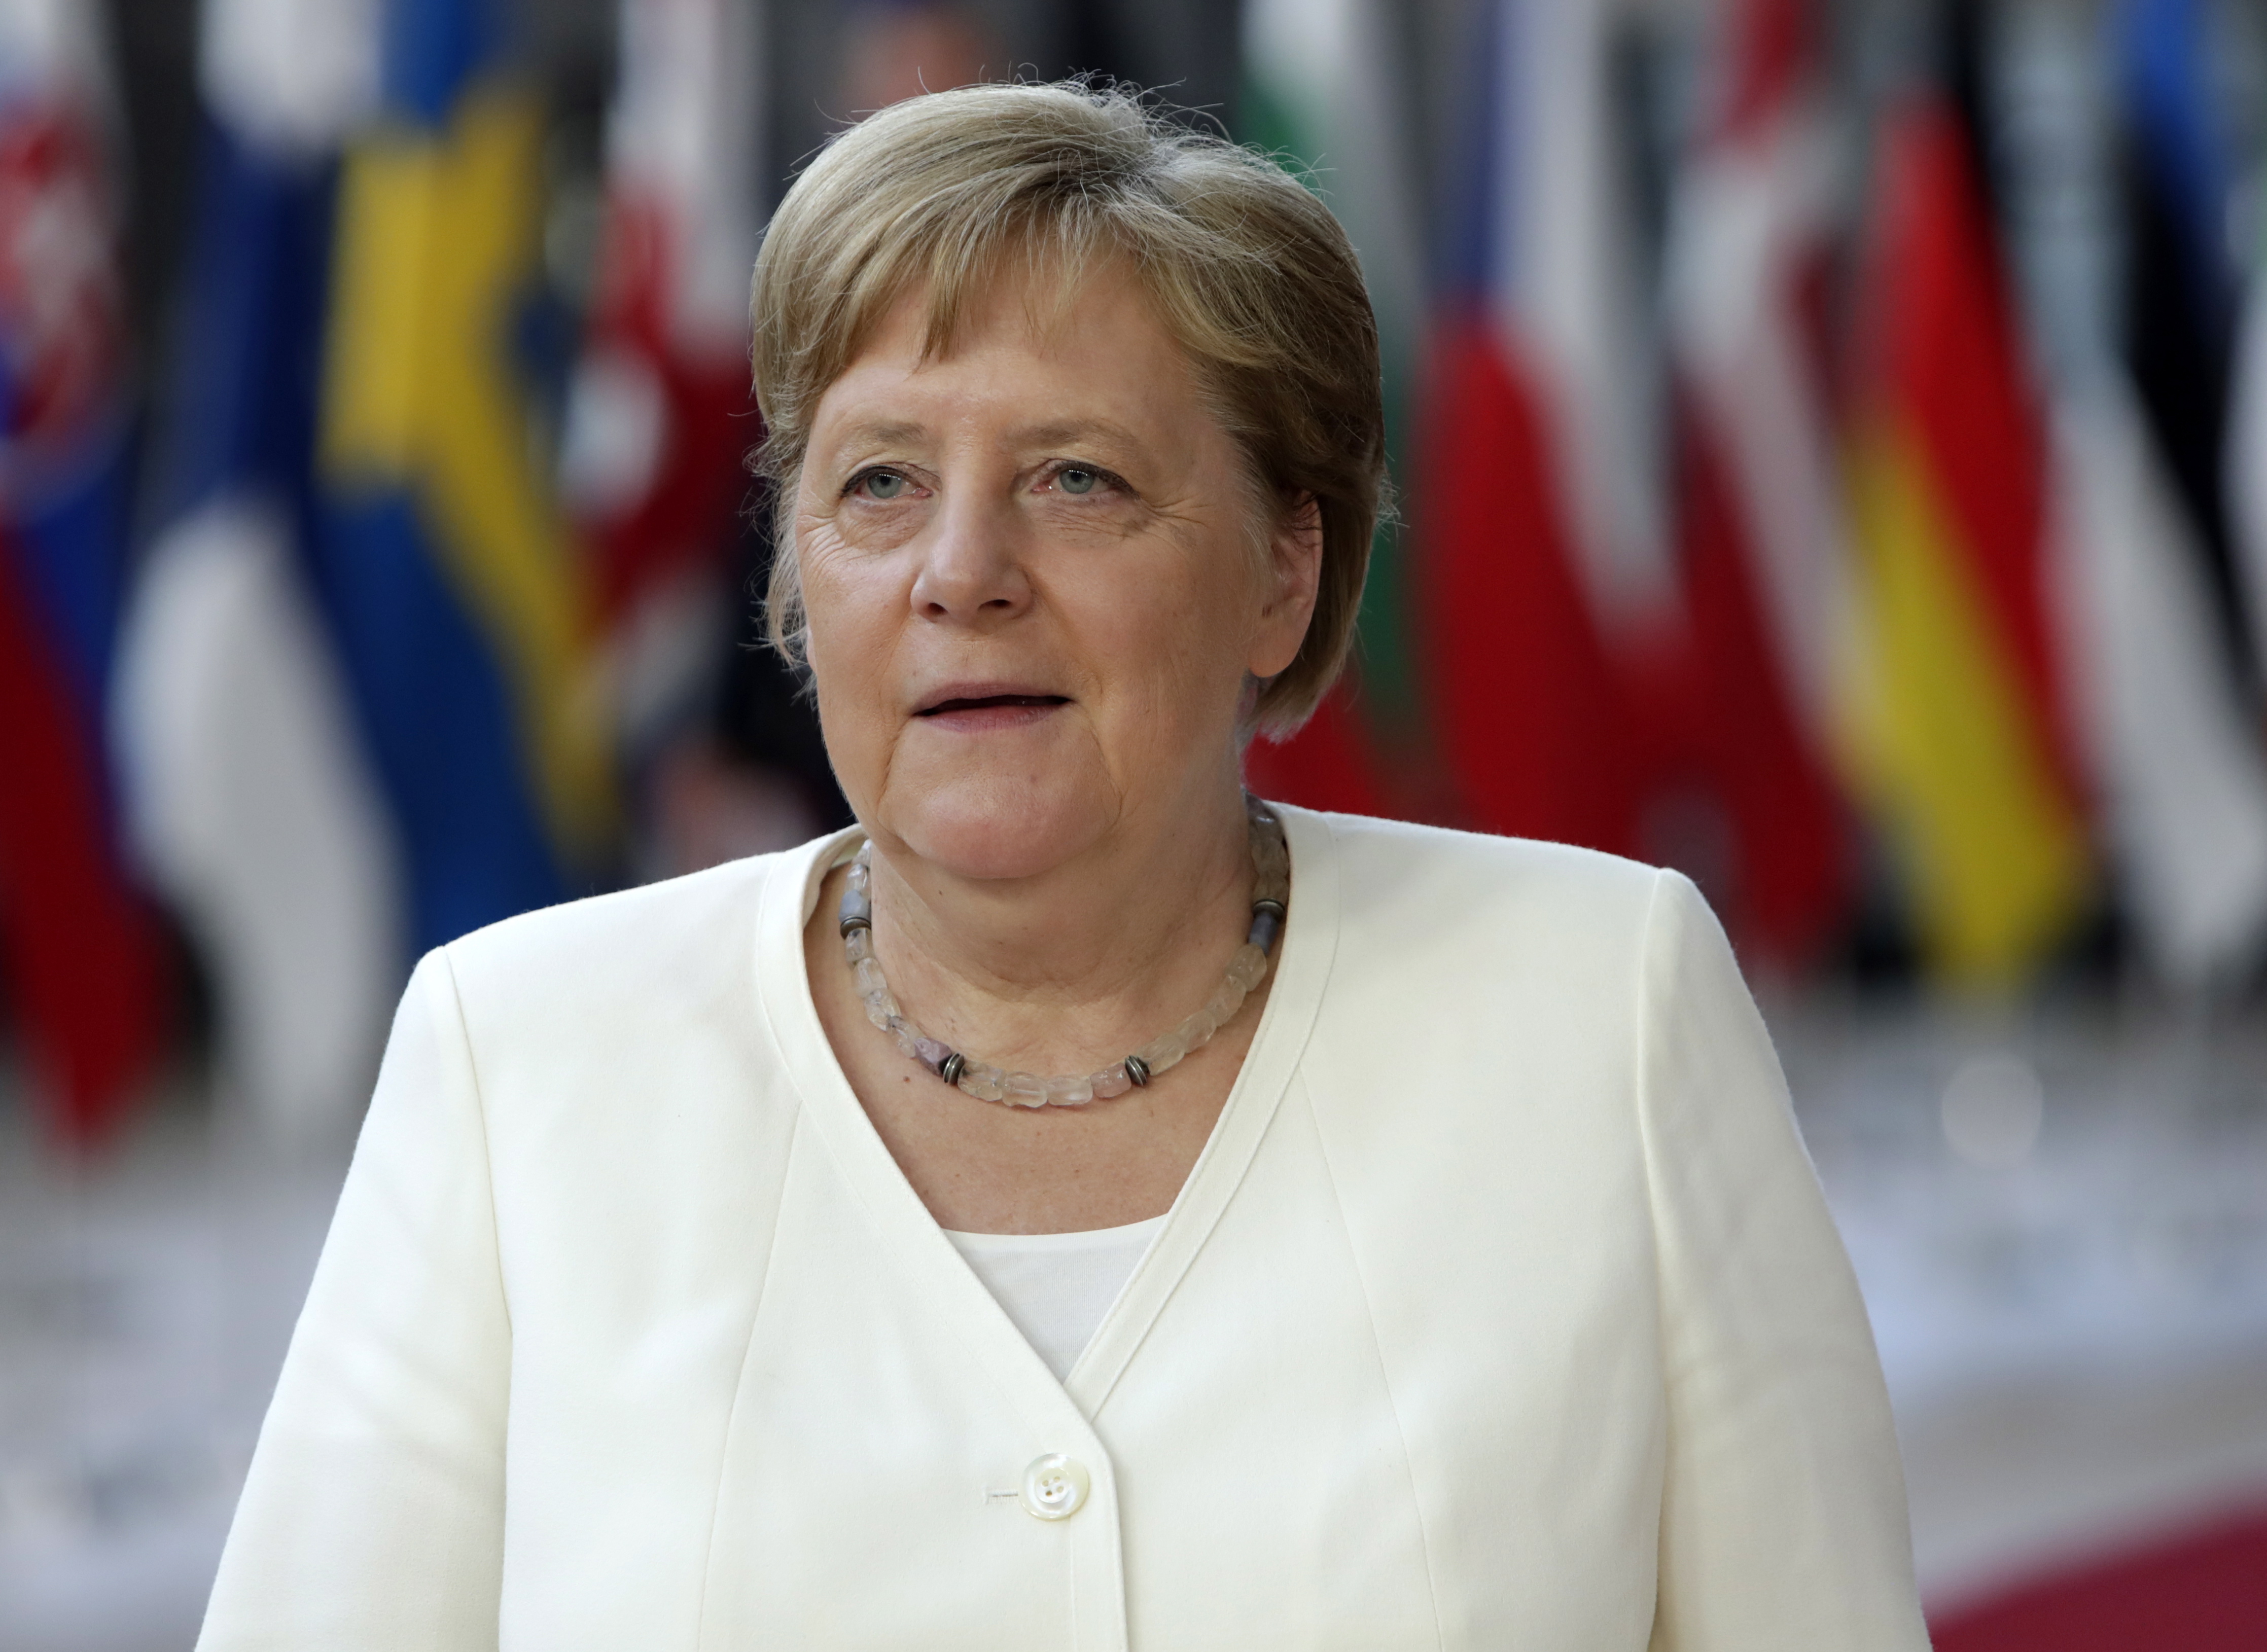 epa07685135 German Chancellor Angela Merkel during arrivals for a Special European Council in Brussels, Belgium, 30 June 2019. Heads of states or governments from EU member states meet to continue discussions on the possible candidates for the heads of EU institutions, namely European Council President, President of the European Commission, High Representative of the Union for Foreign Affairs and Security Policy (Foreign Policy Chief), and President of the European Central Bank.  EPA/ARIS OIKONOMOU